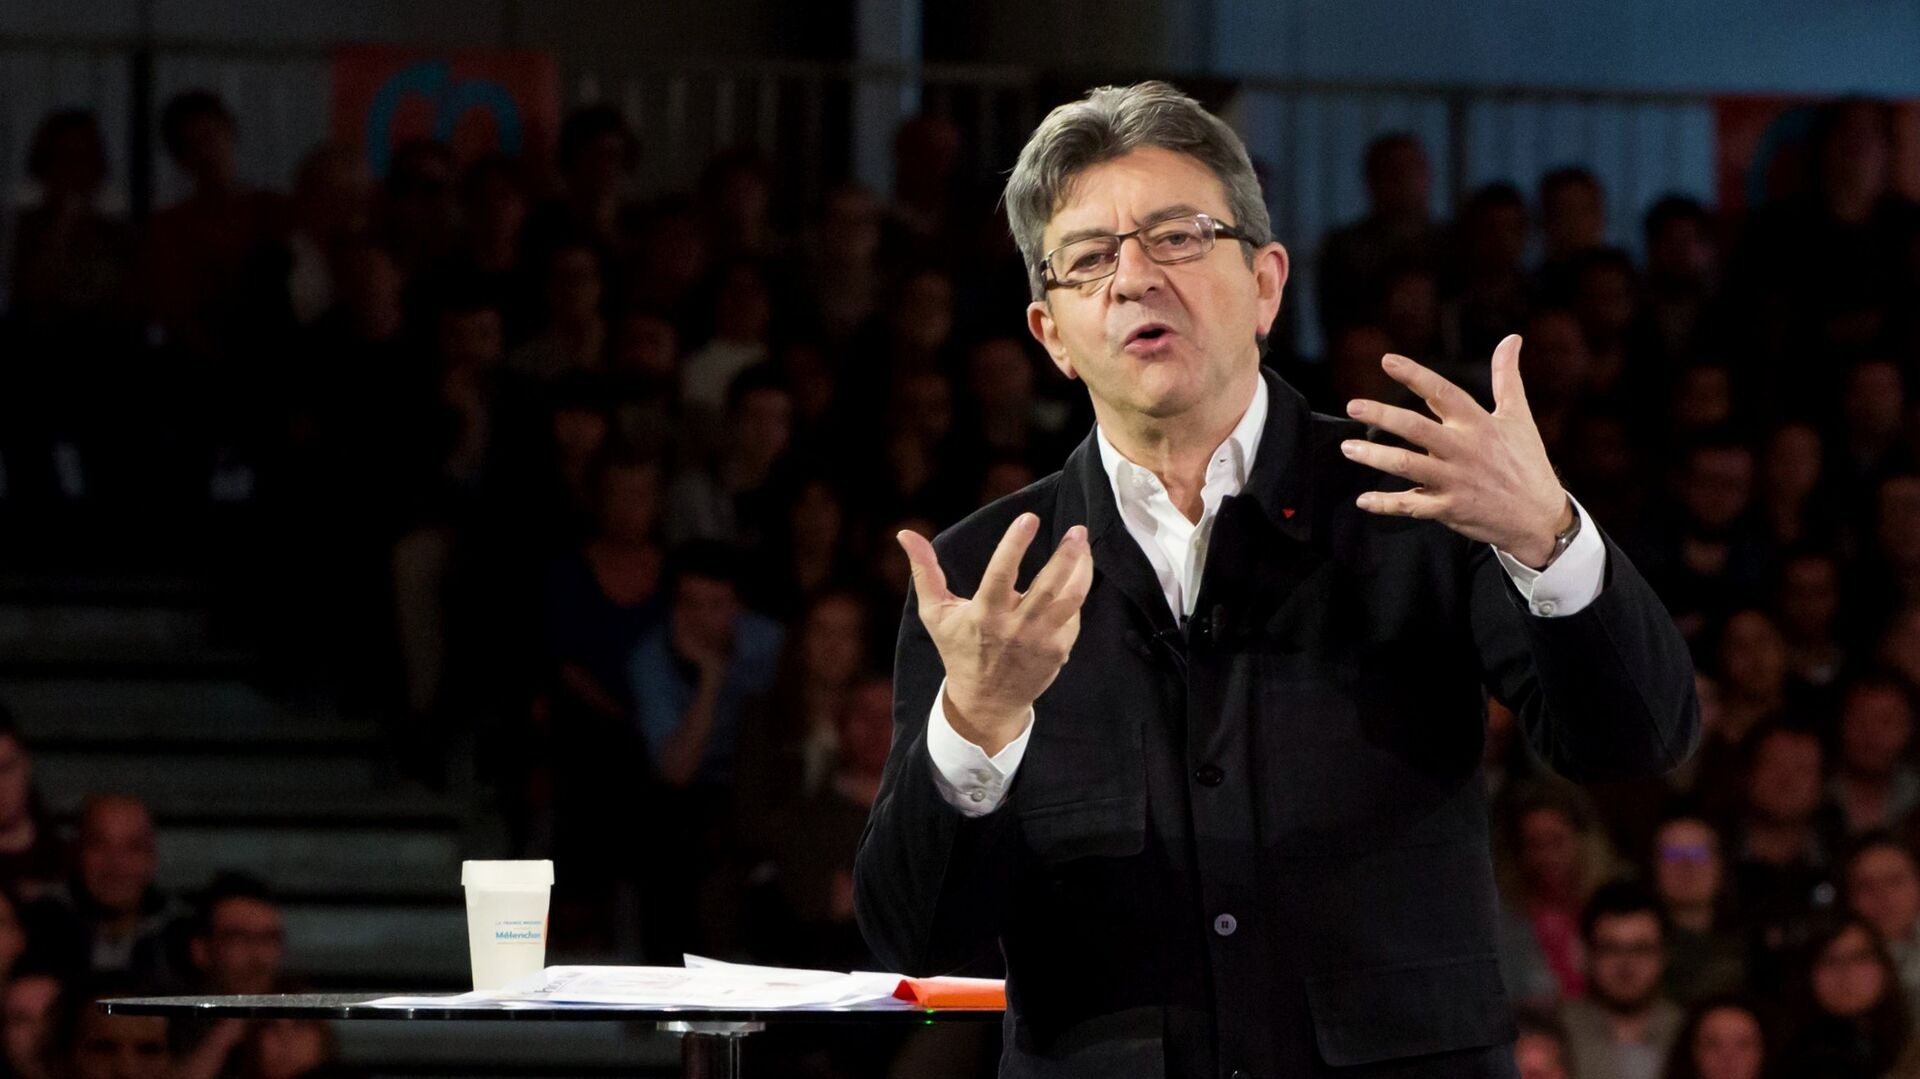 Jean-Luc Melenchon during a rally in Lille, France during last year's presidential election. - Sputnik International, 1920, 12.02.2022